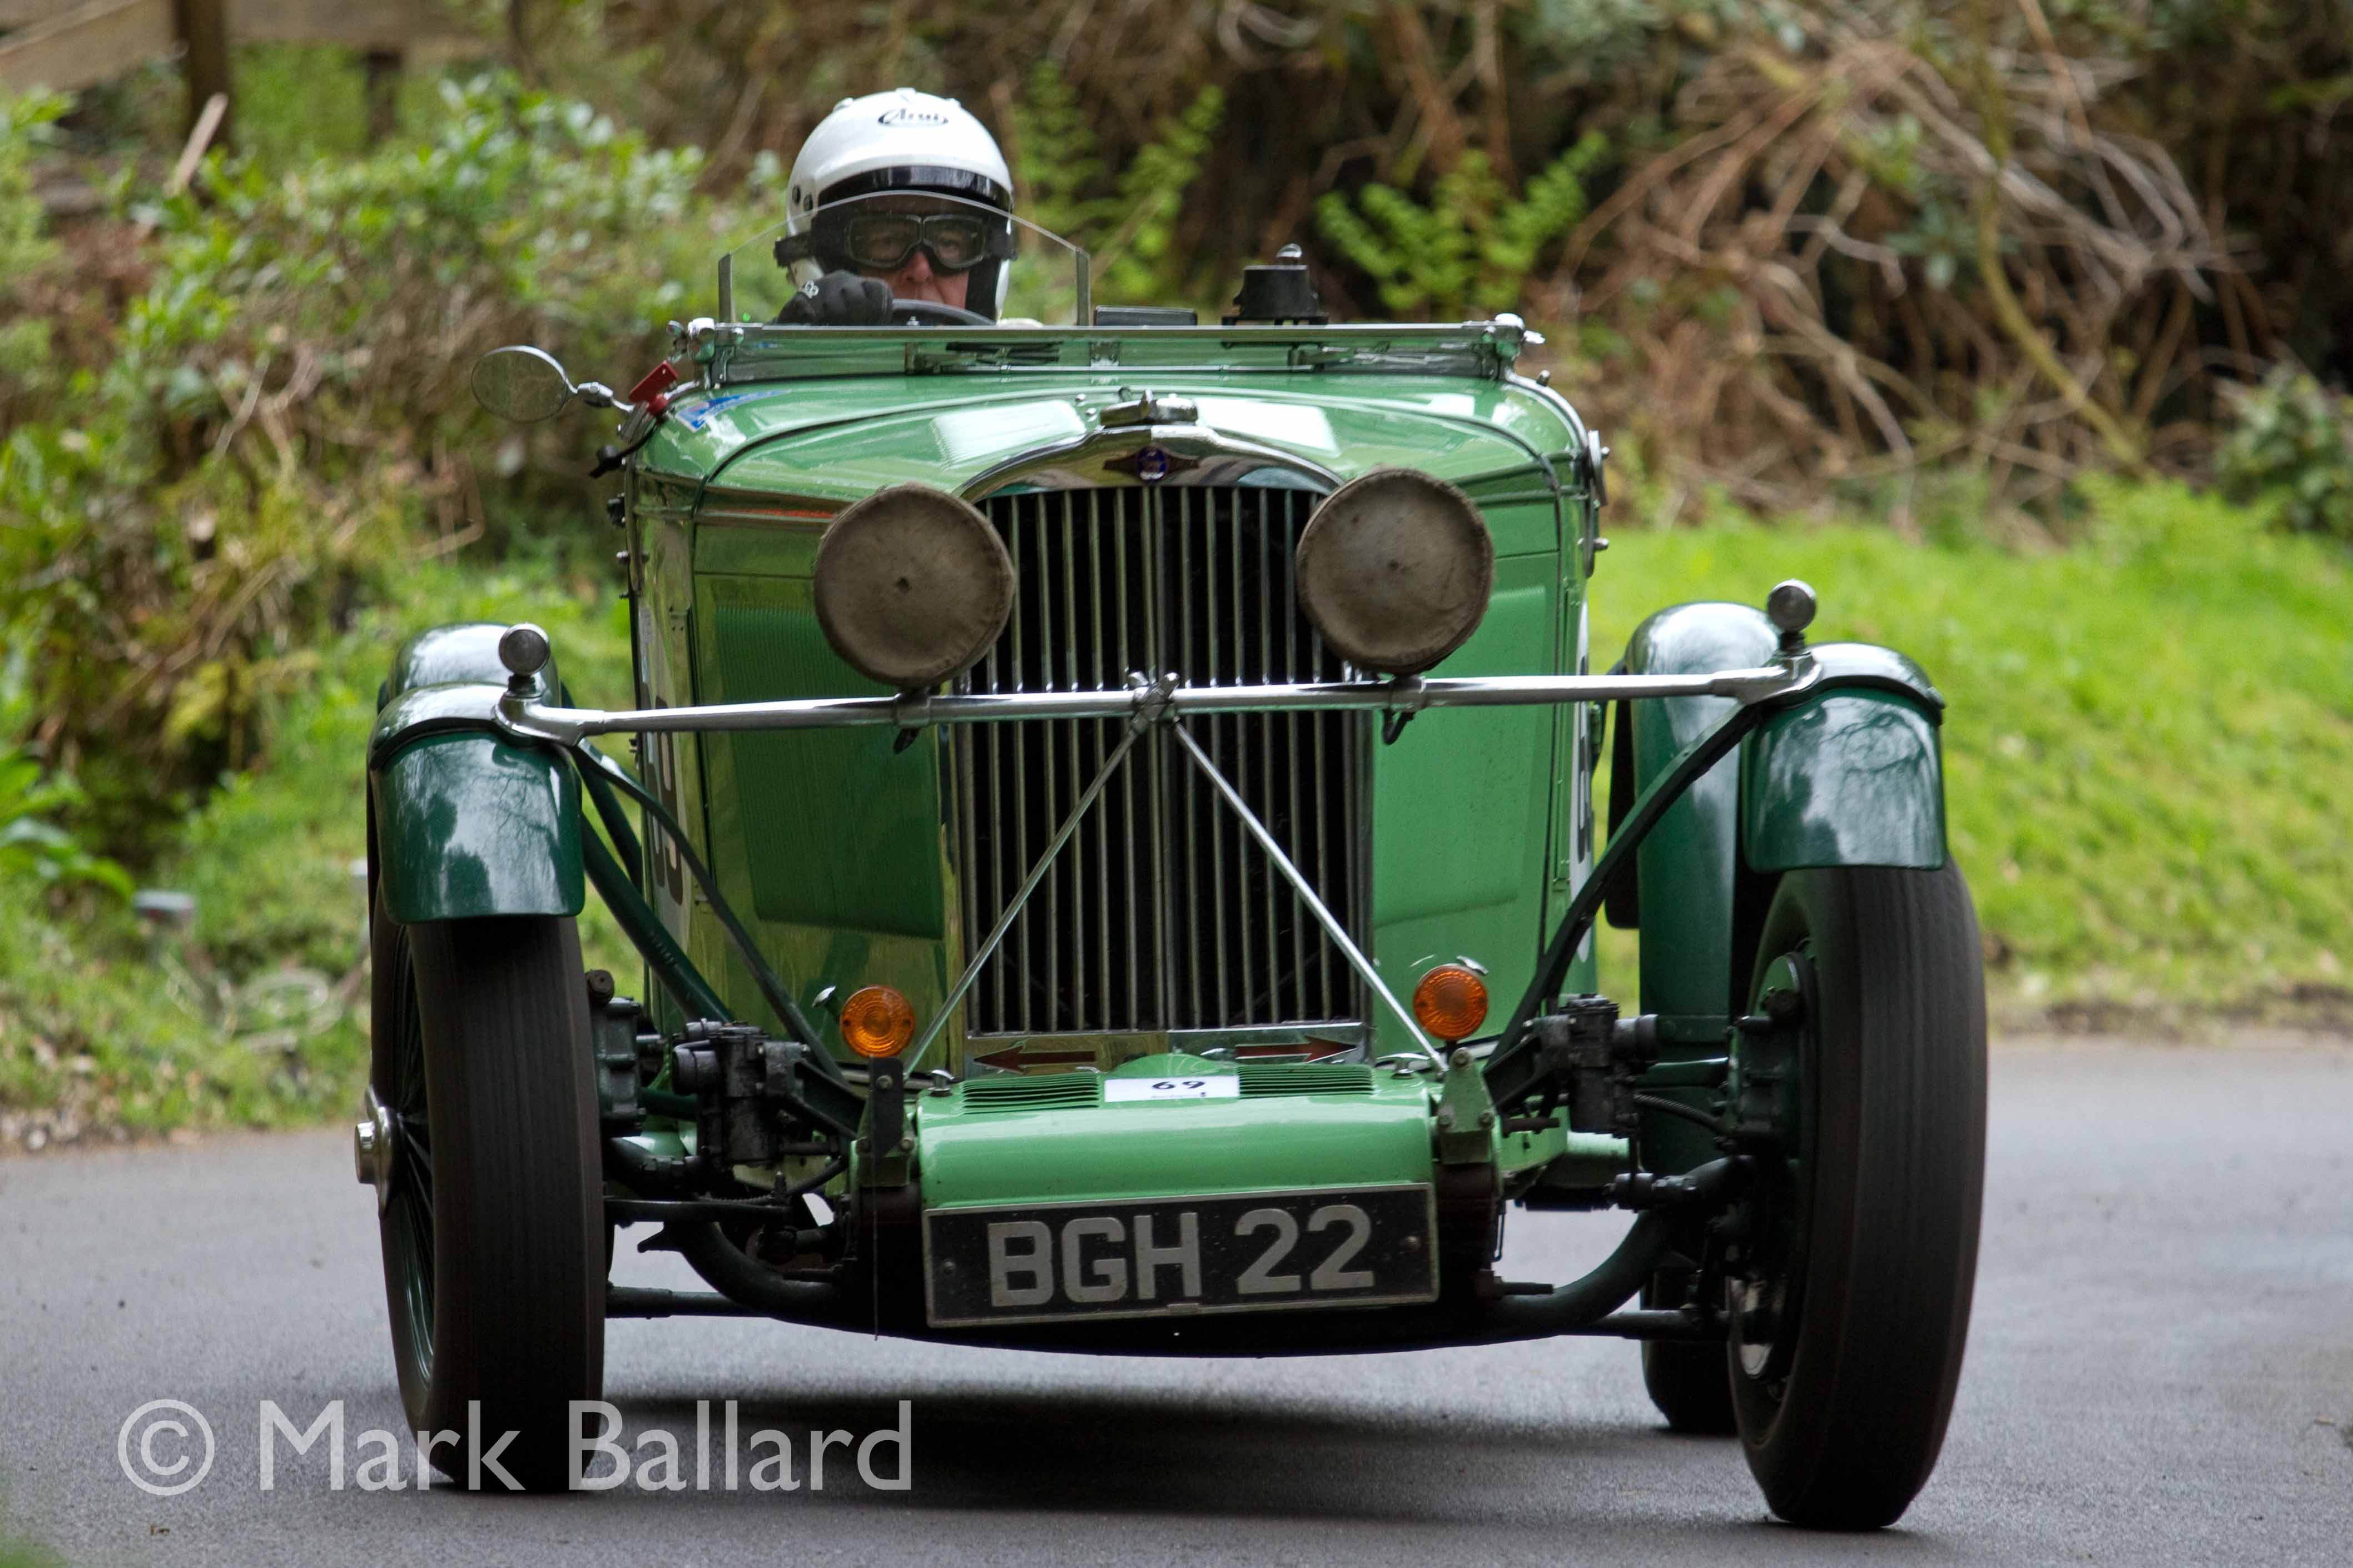 Less than a week to enter the VSCC Wiscombe Park Hill Climb cover